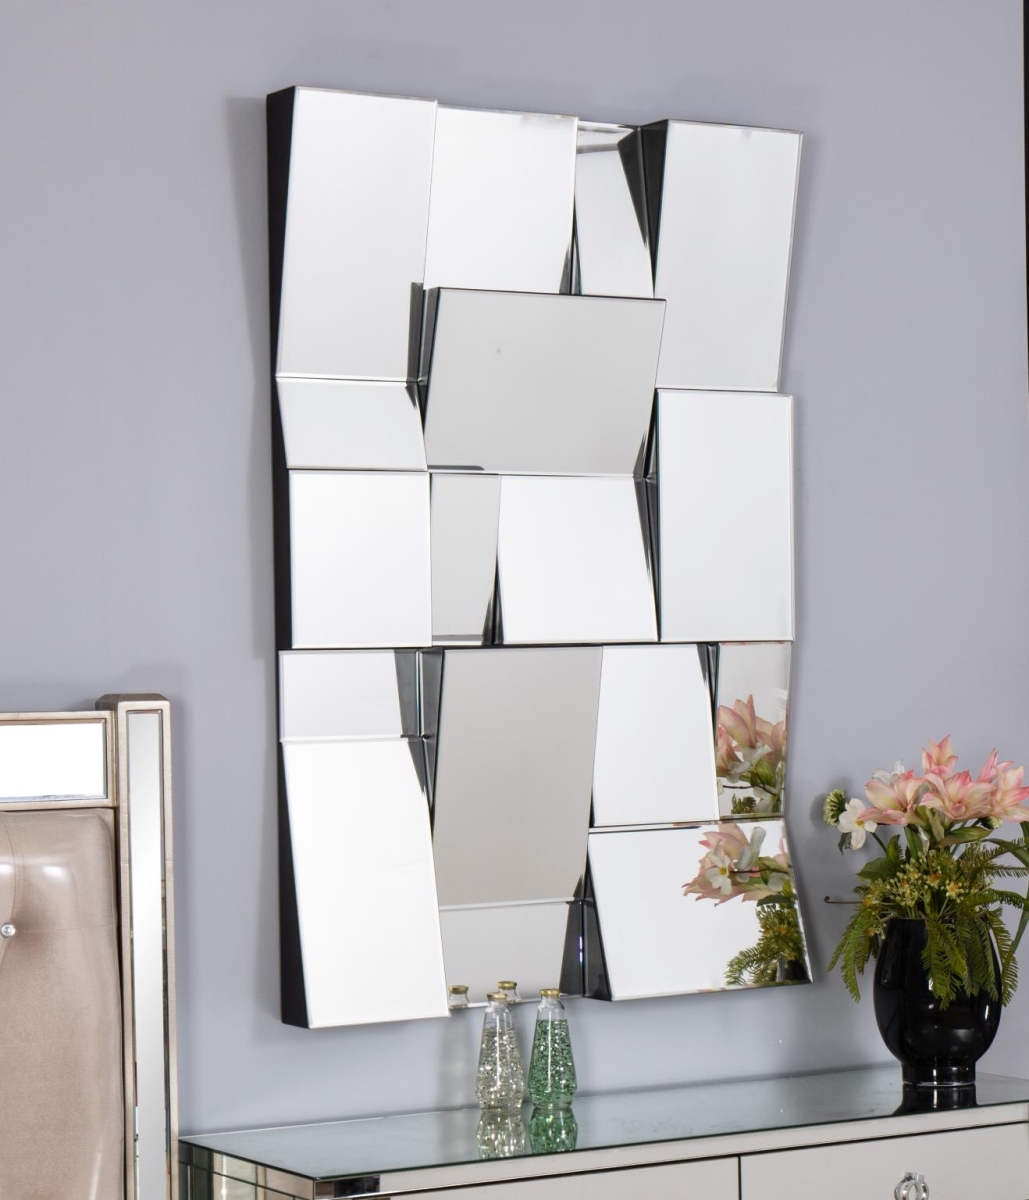 Myco Furniture Cl906 4 X 32 X 48 In. Claire Wall Mirror, Clear Mirror